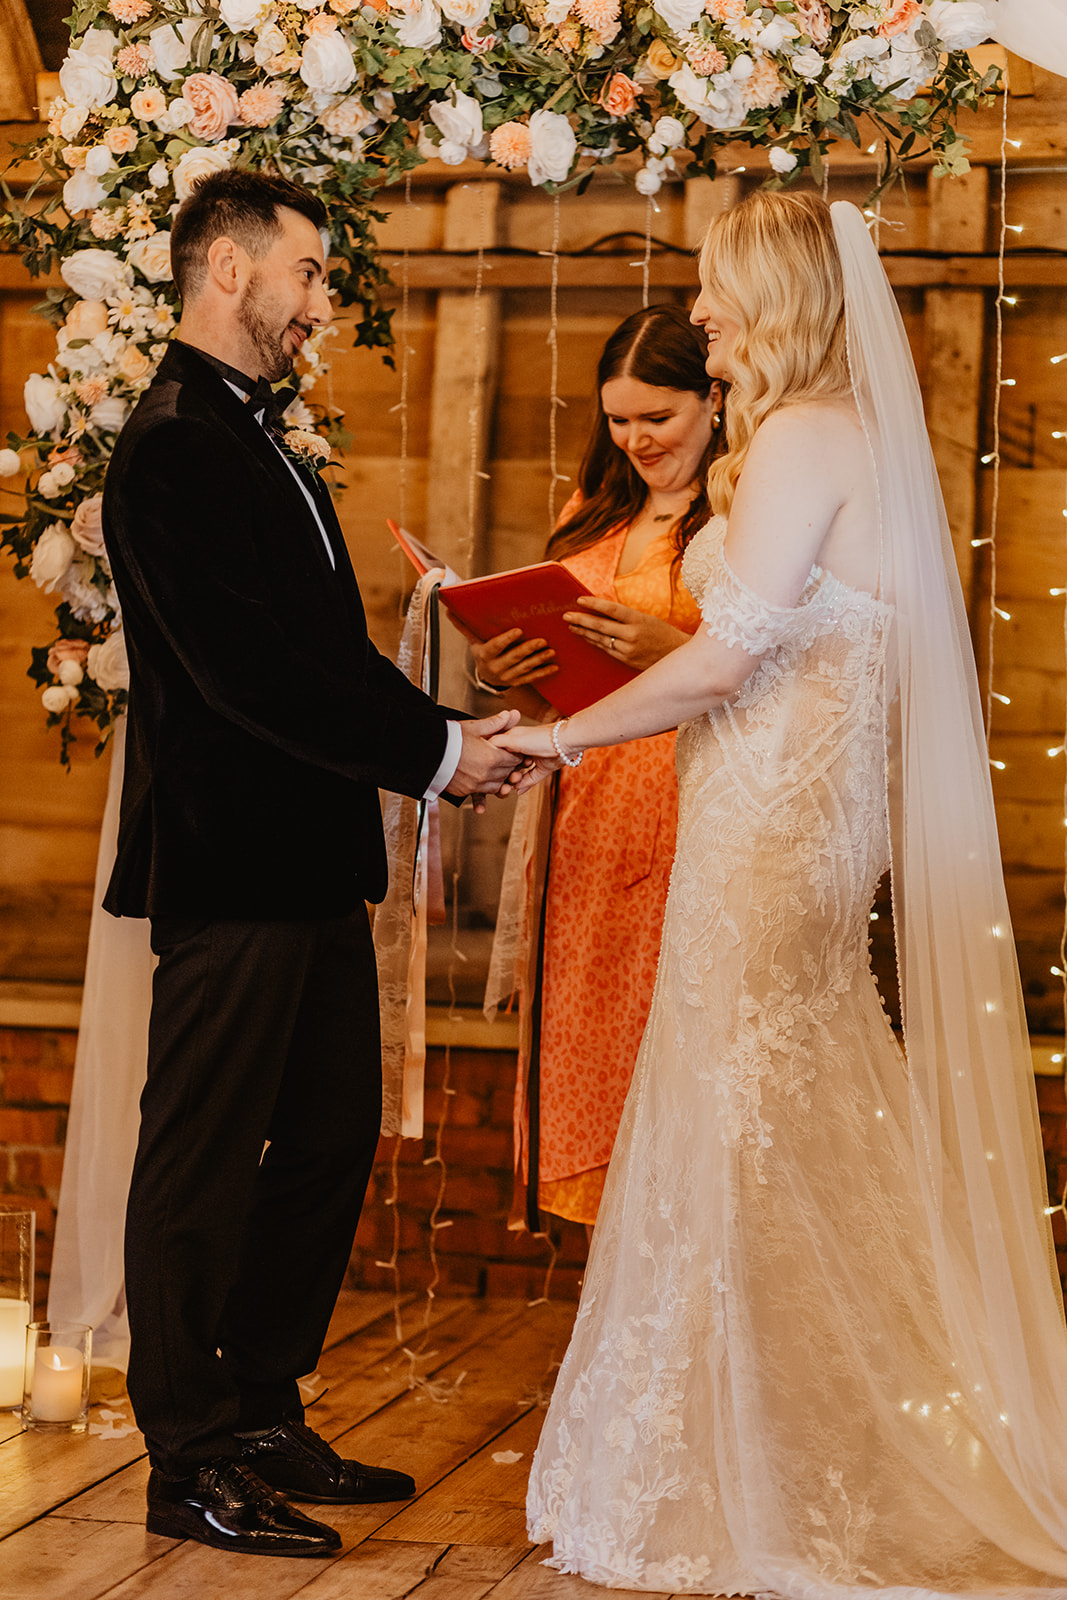 Bride and groom exchange vows at a Southlands barn wedding, Sussex. Photo by OliveJoy Photography.